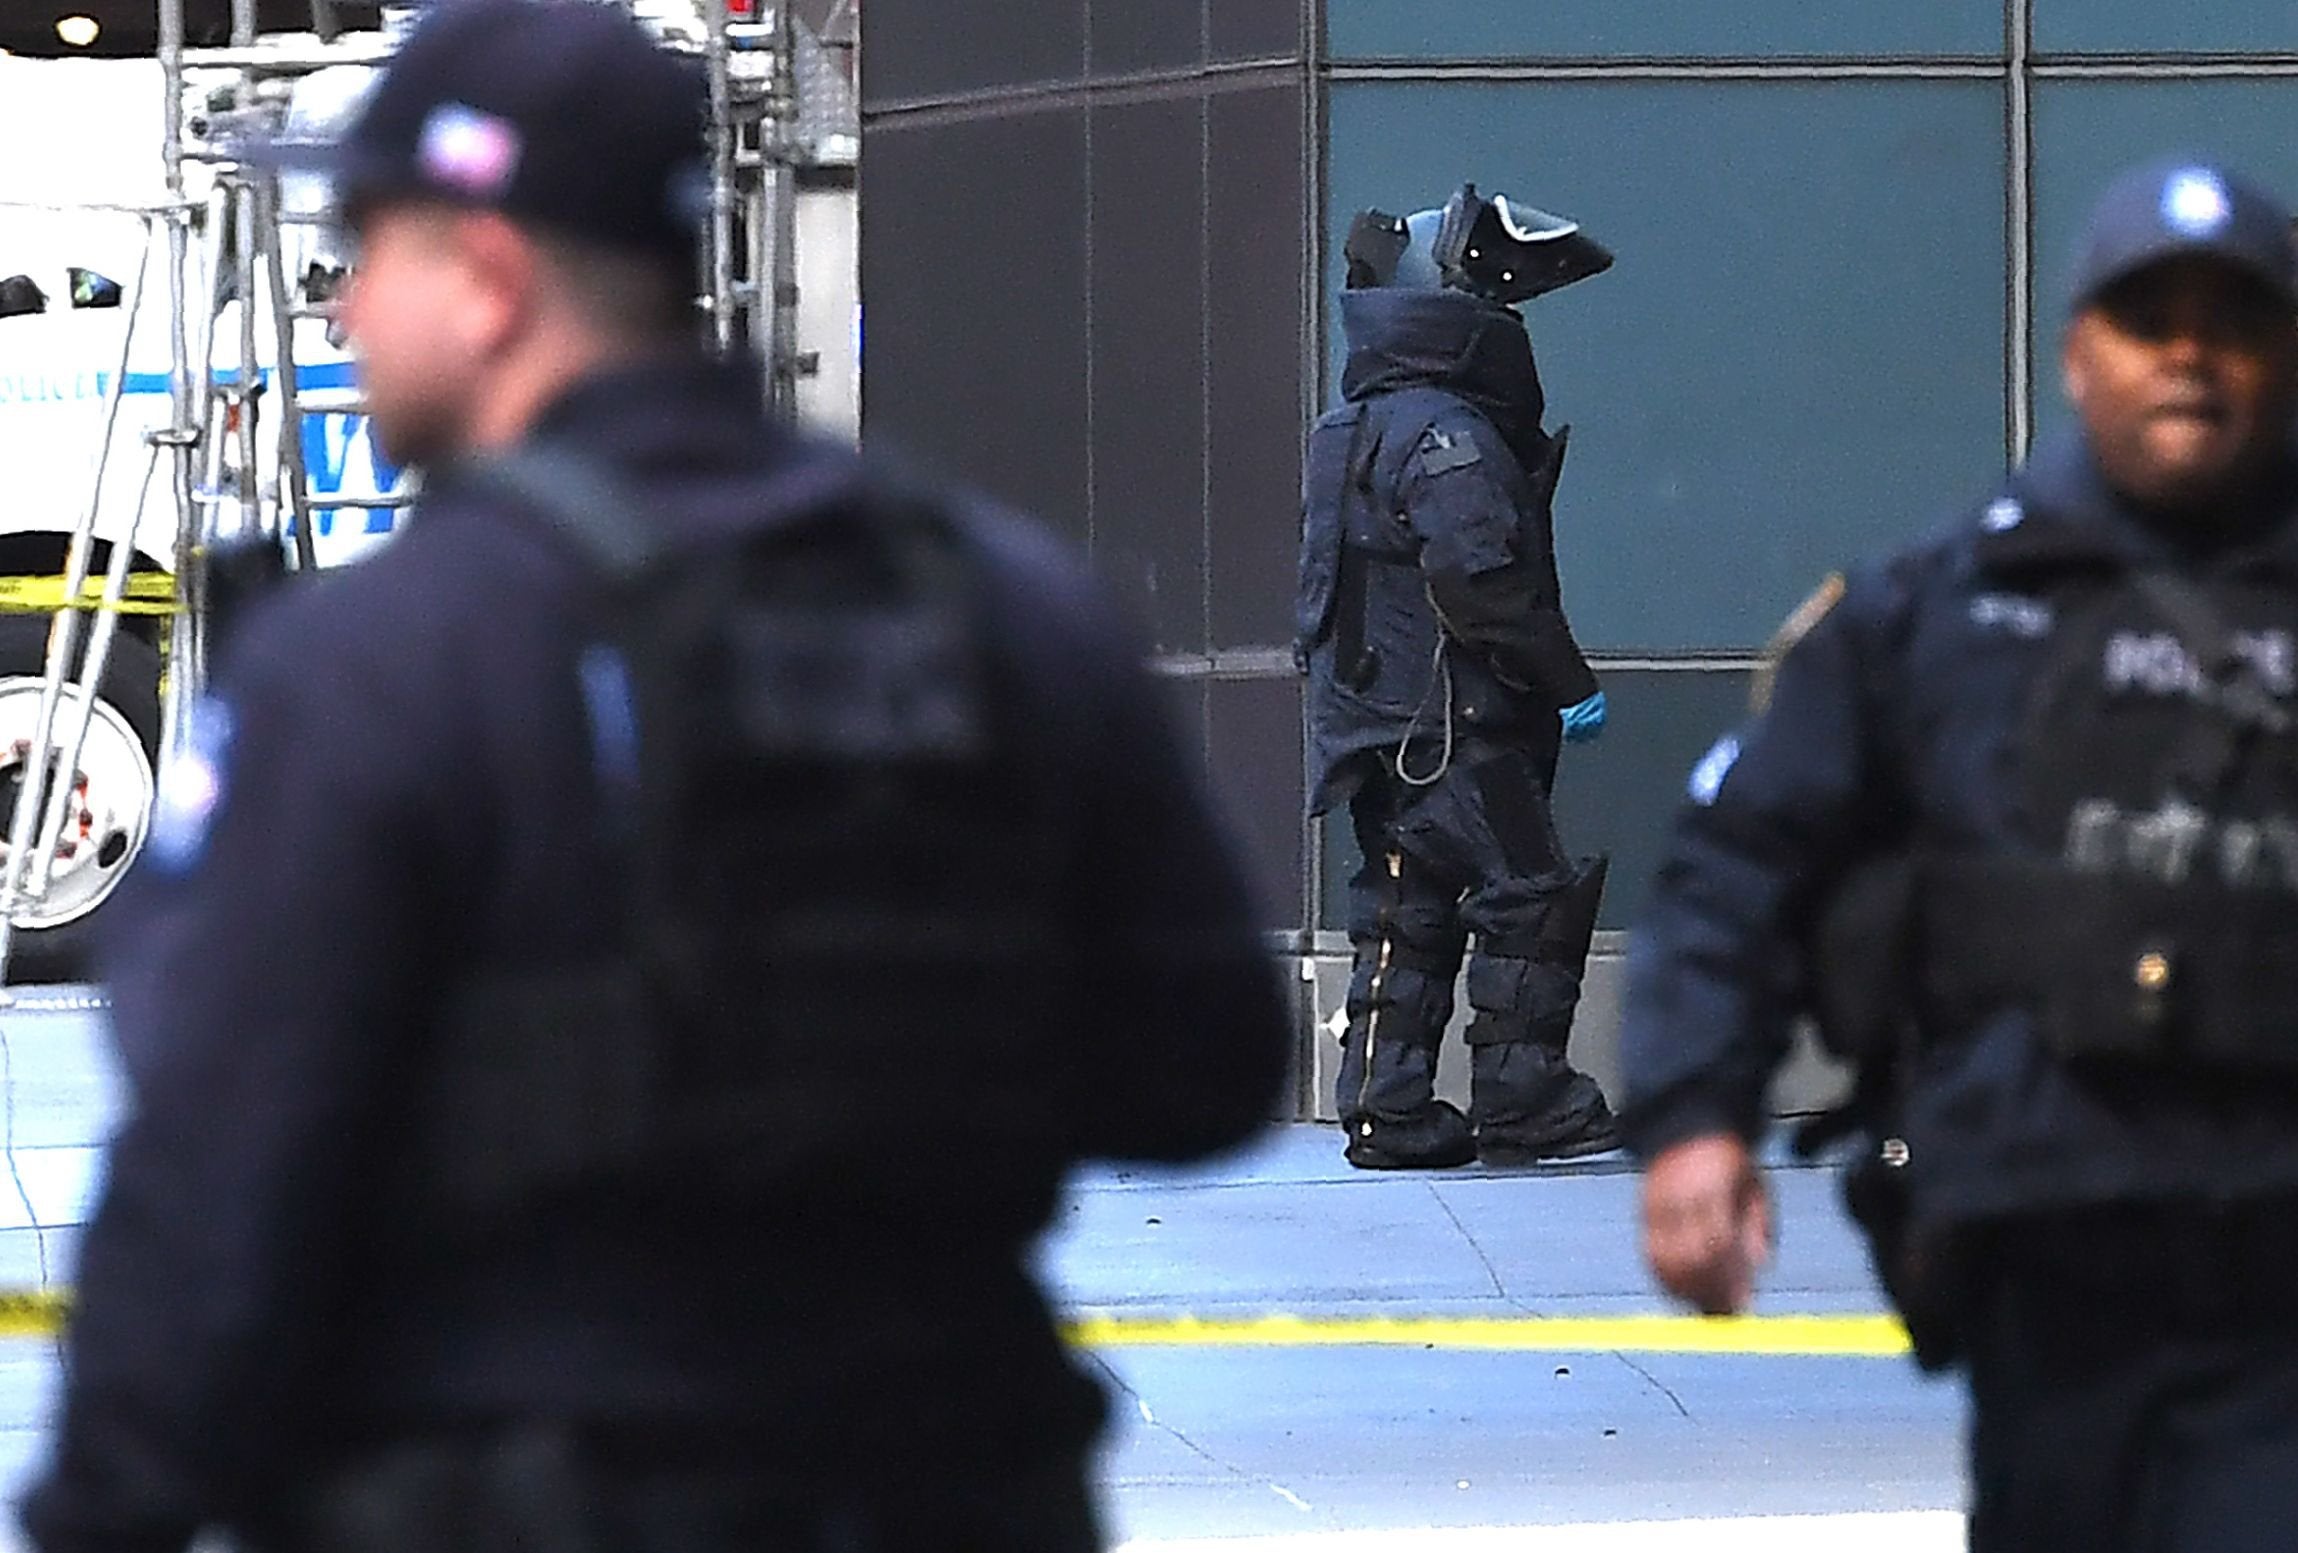 New York City Police Department Bomb Unit personnel arrive outside the Time Warner Building on 24 October 2018 after an explosive device was delivered to CNN's New York bureau. (TIMOTHY A. CLARY/